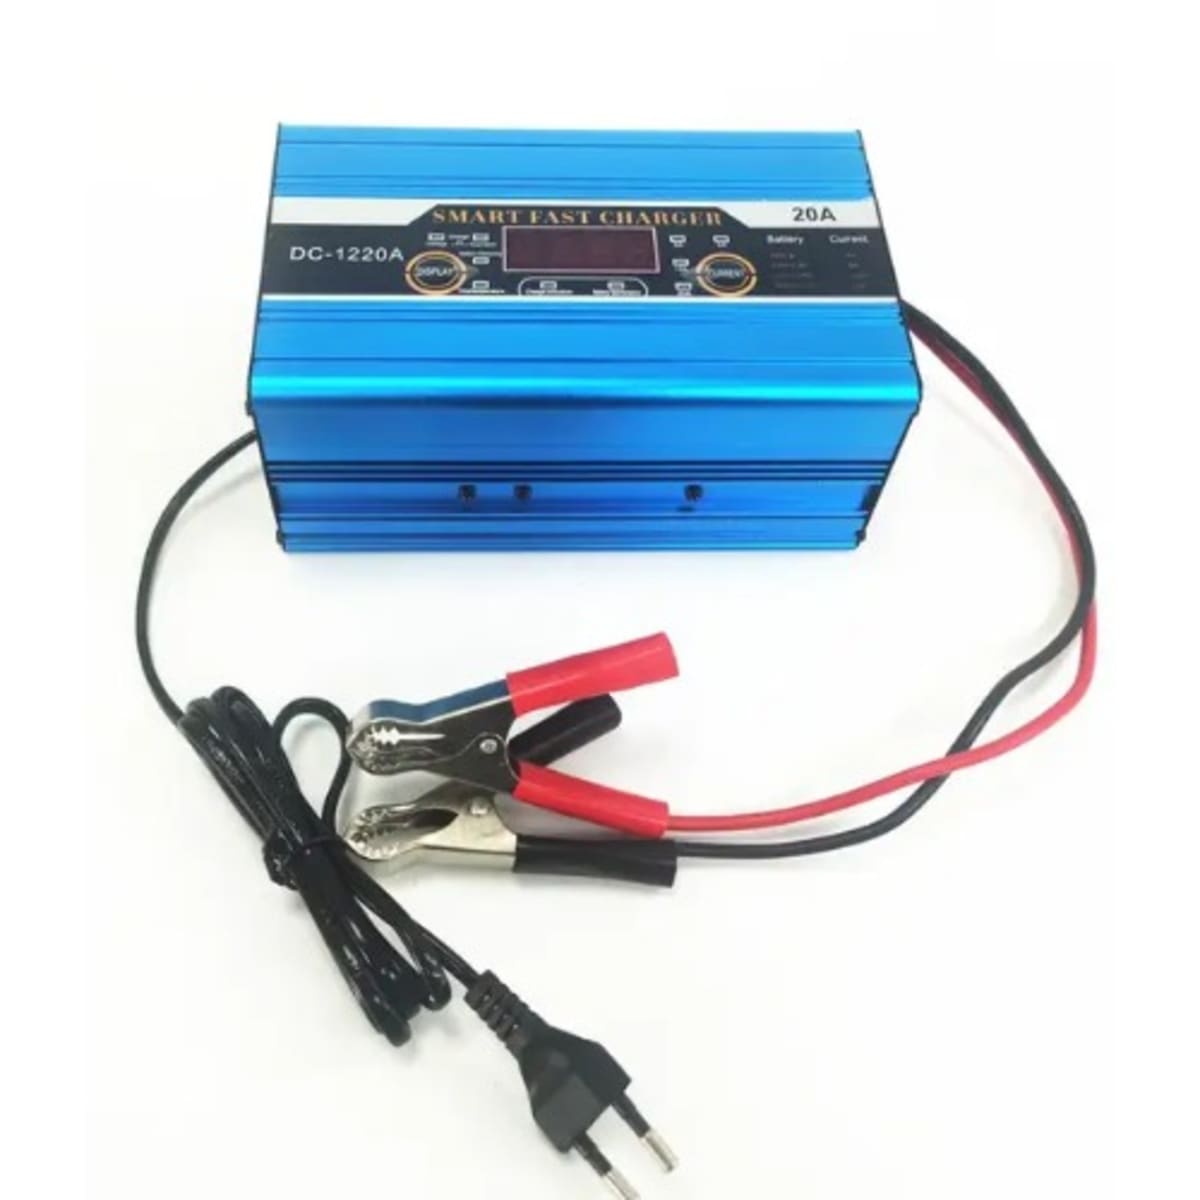 Suoer Smart Fast Battery Charger 12V 10A With LCD Screen Display